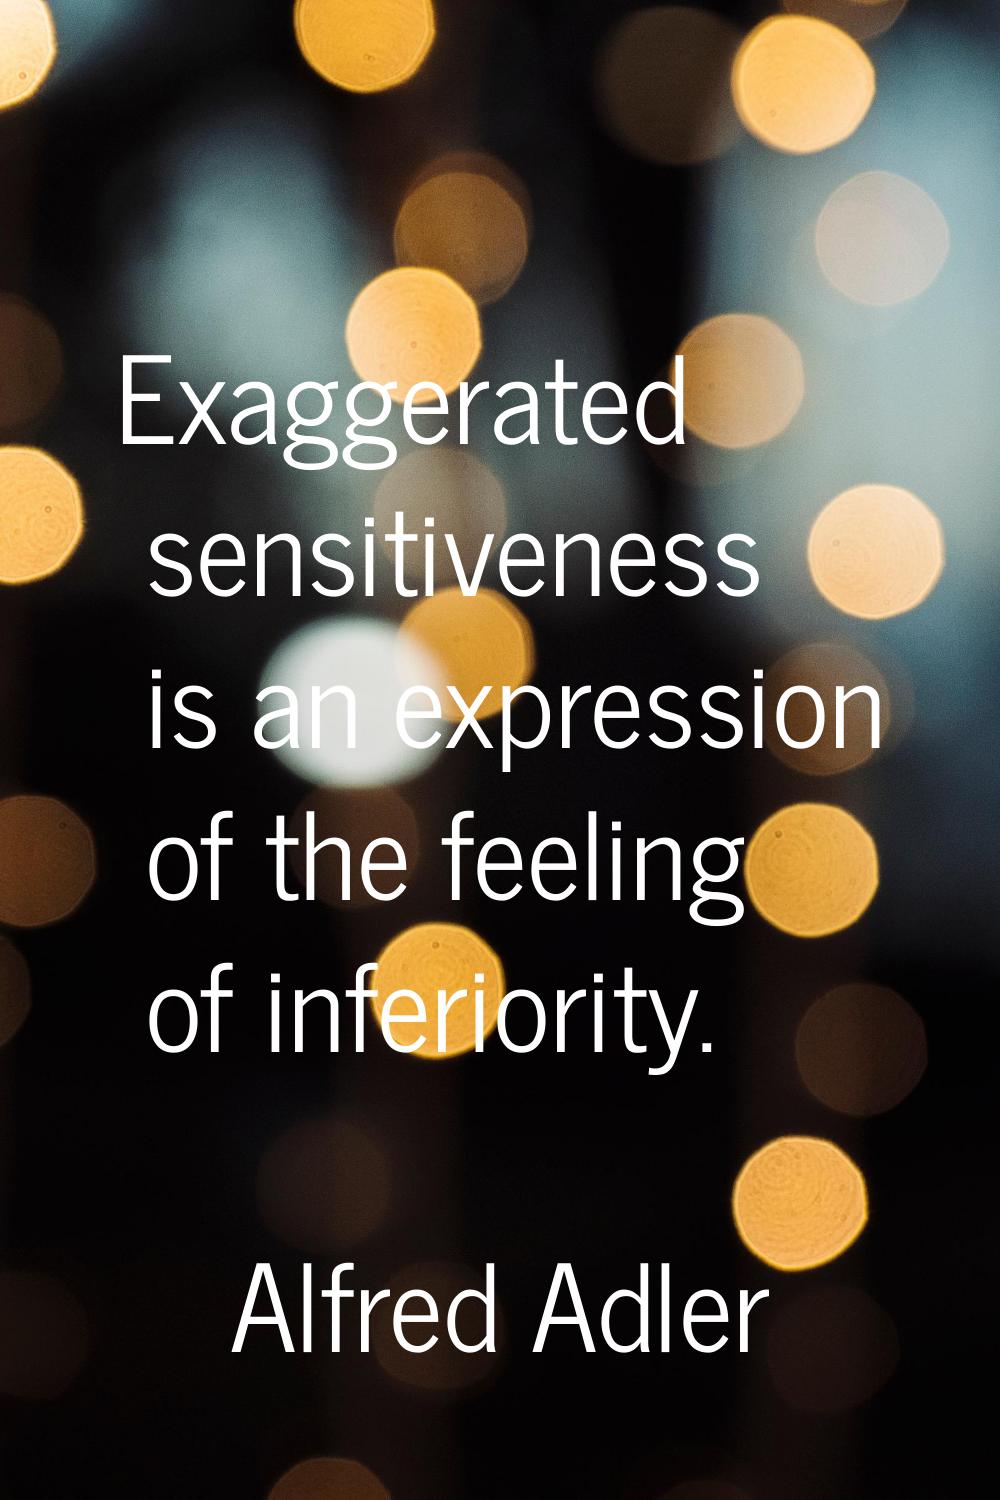 Exaggerated sensitiveness is an expression of the feeling of inferiority.